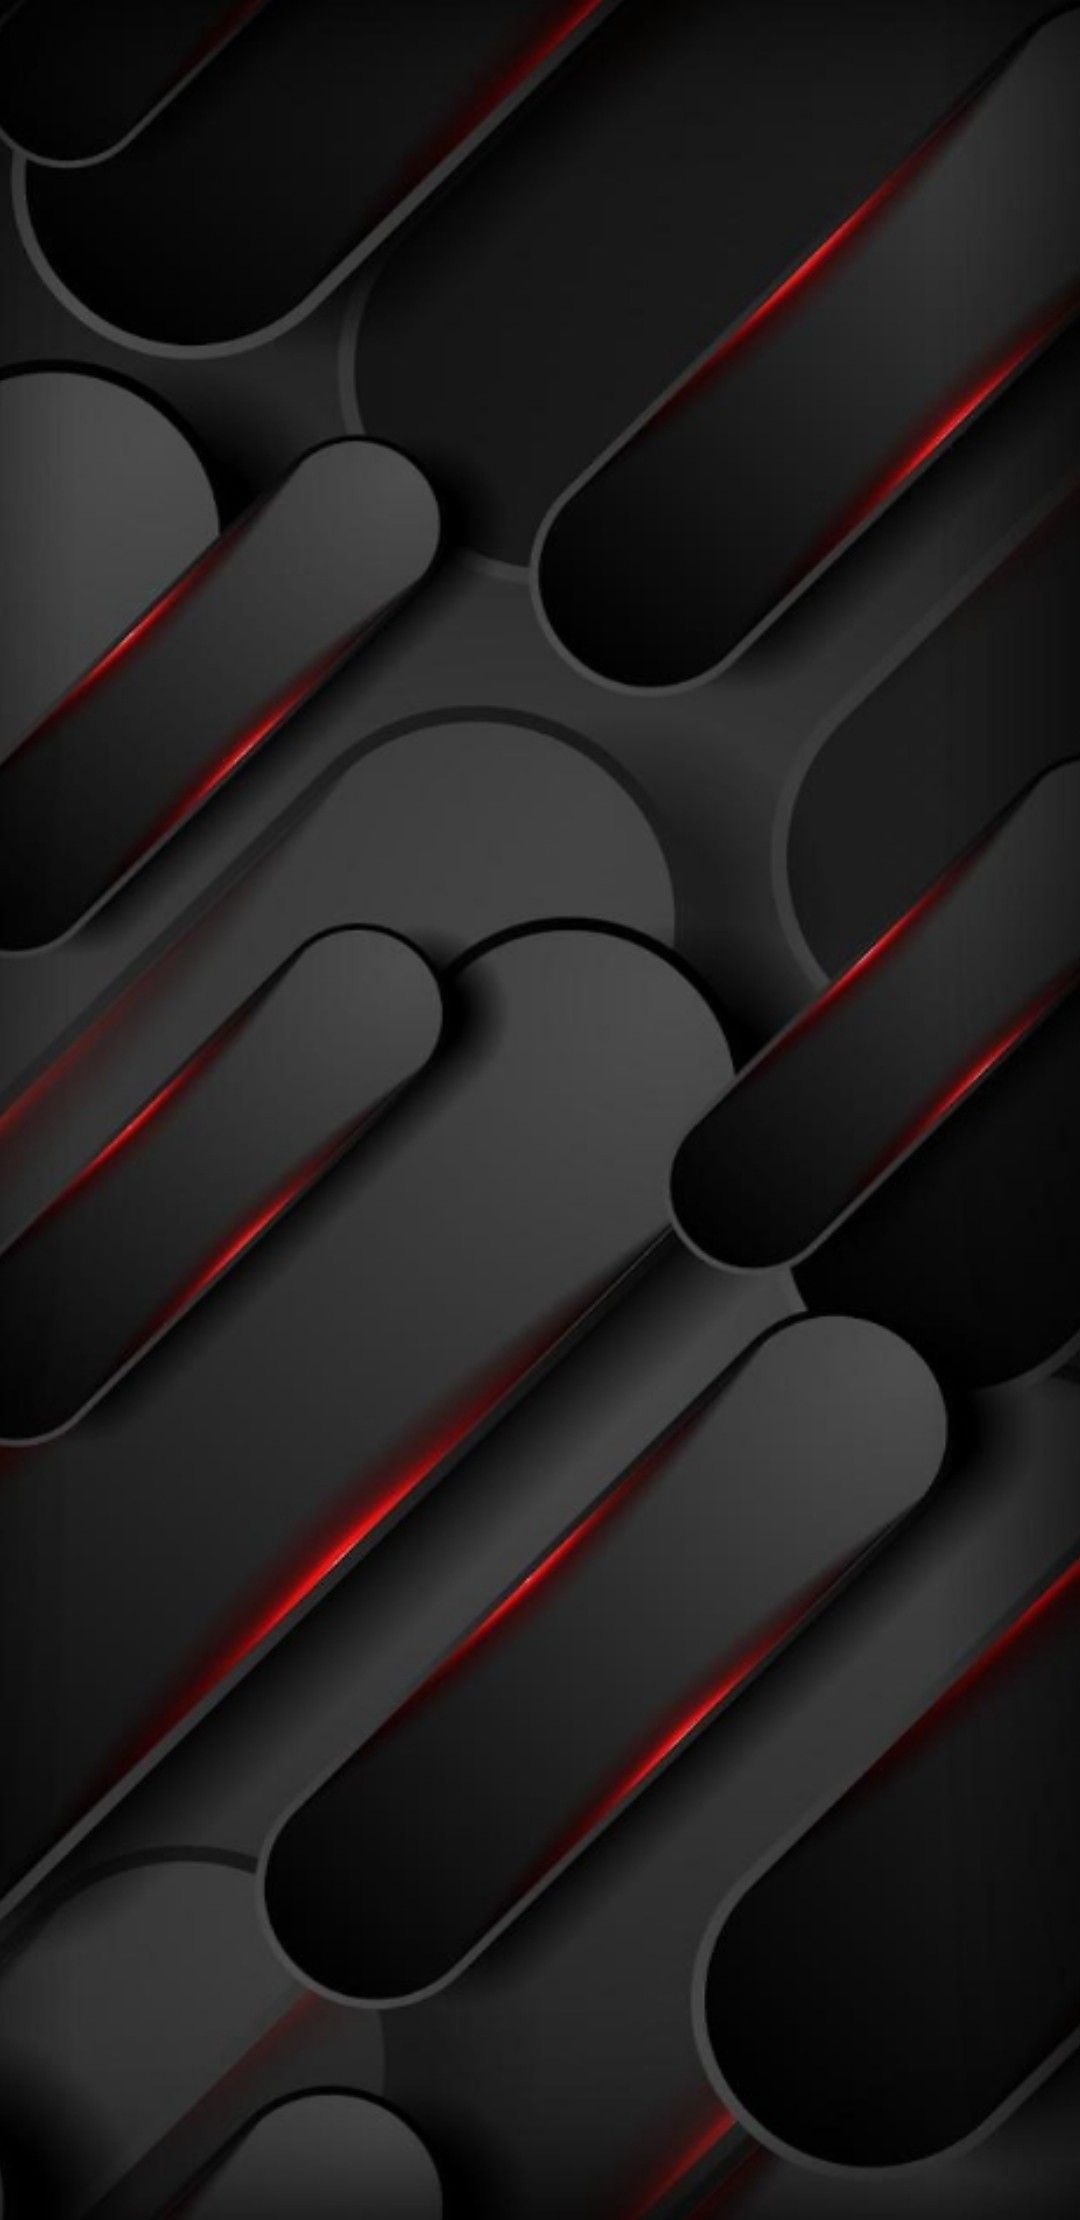 Home Screen Wallpaper For Android